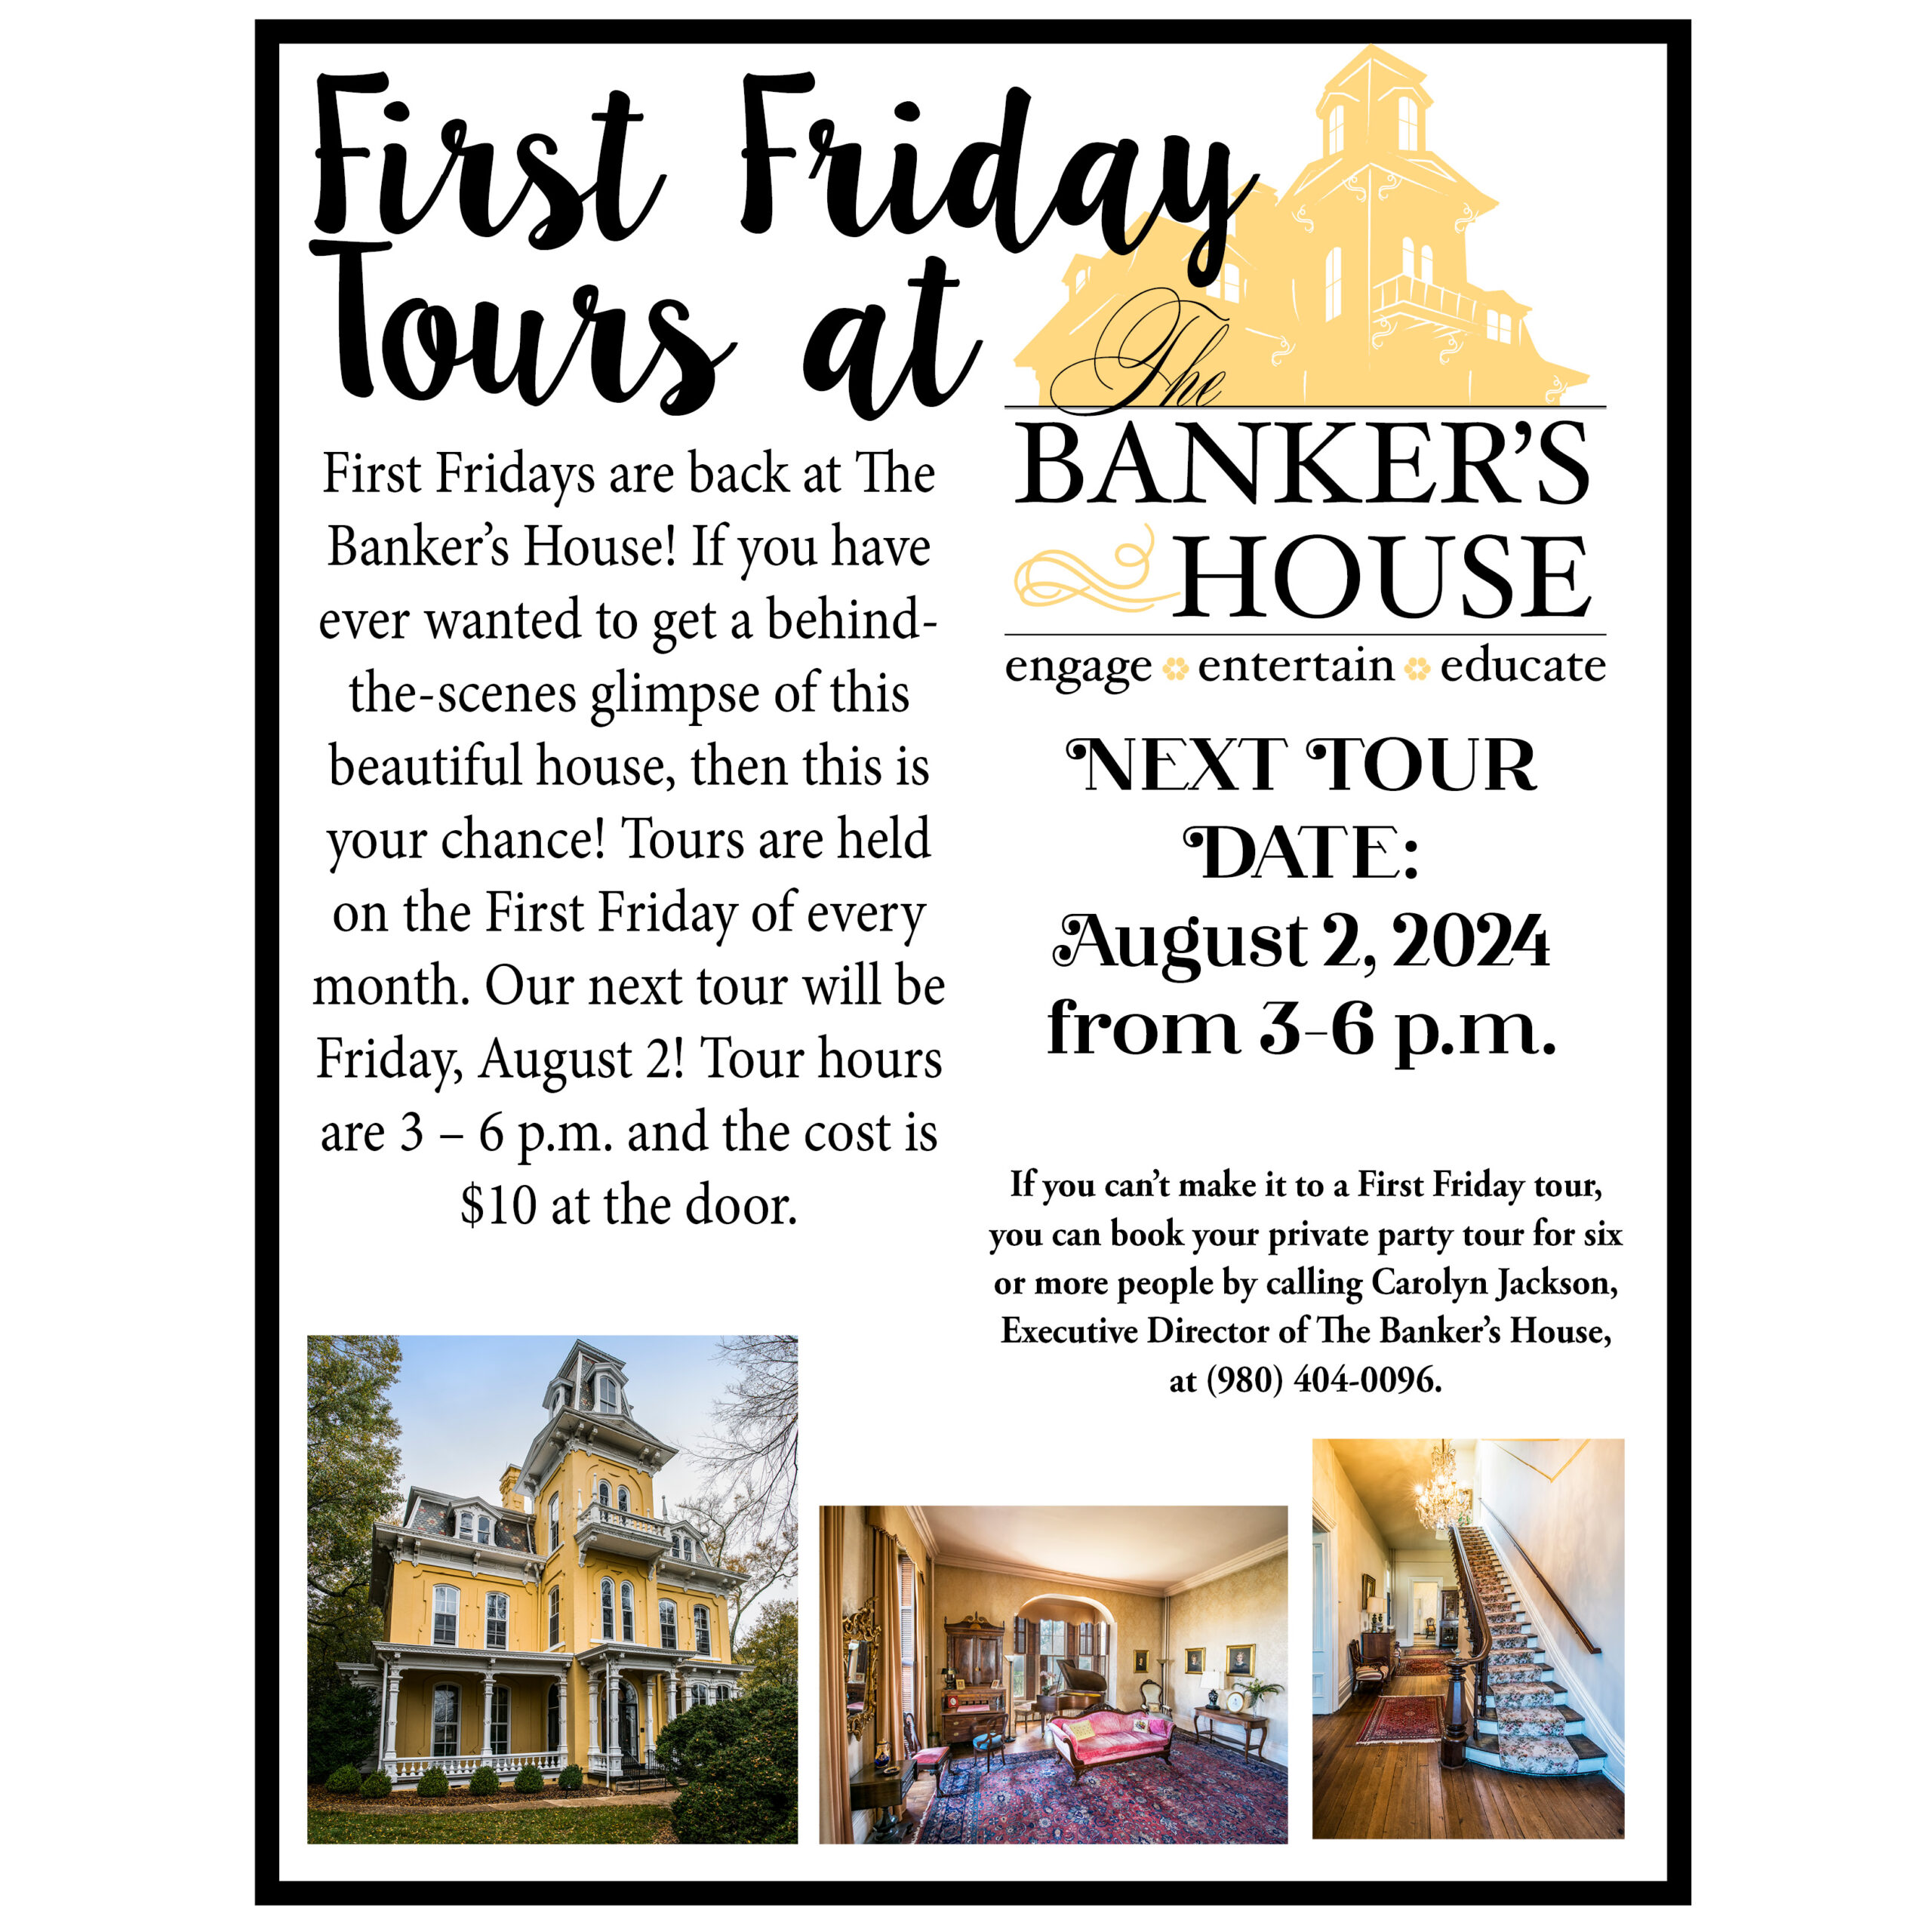 First Friday Tours at the Banker's House will be on Aug. 2, 2024, from 3-6 p.m. Cost is $10 at the door.